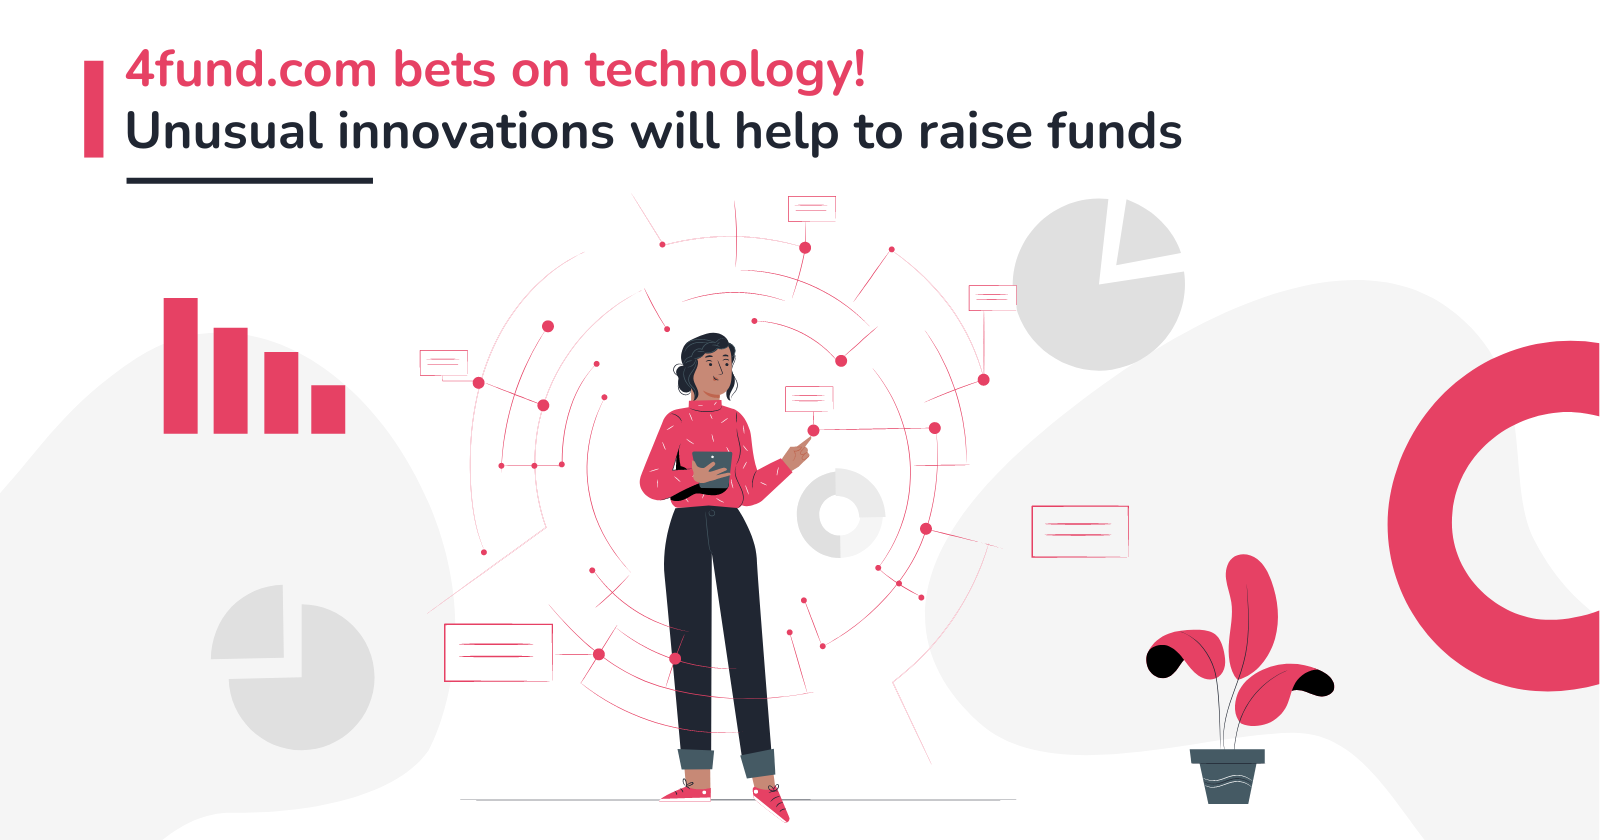 4fund.com bets on technology! Unusual innovations will help to raise funds.